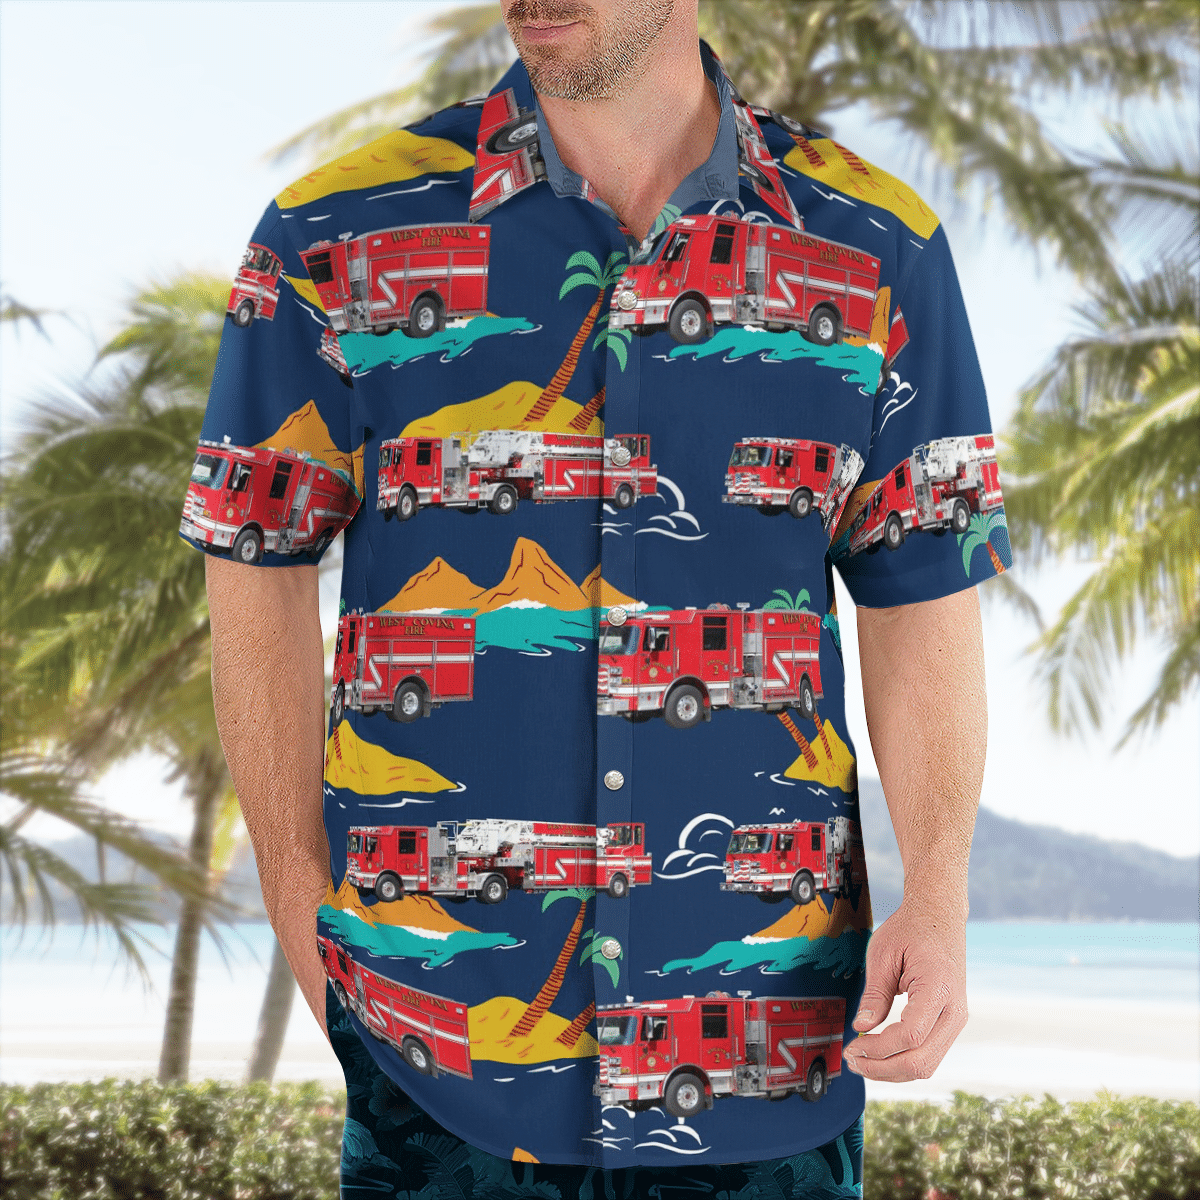 There are several styles of beach and Hawaiian shorts and tops to choose from 191